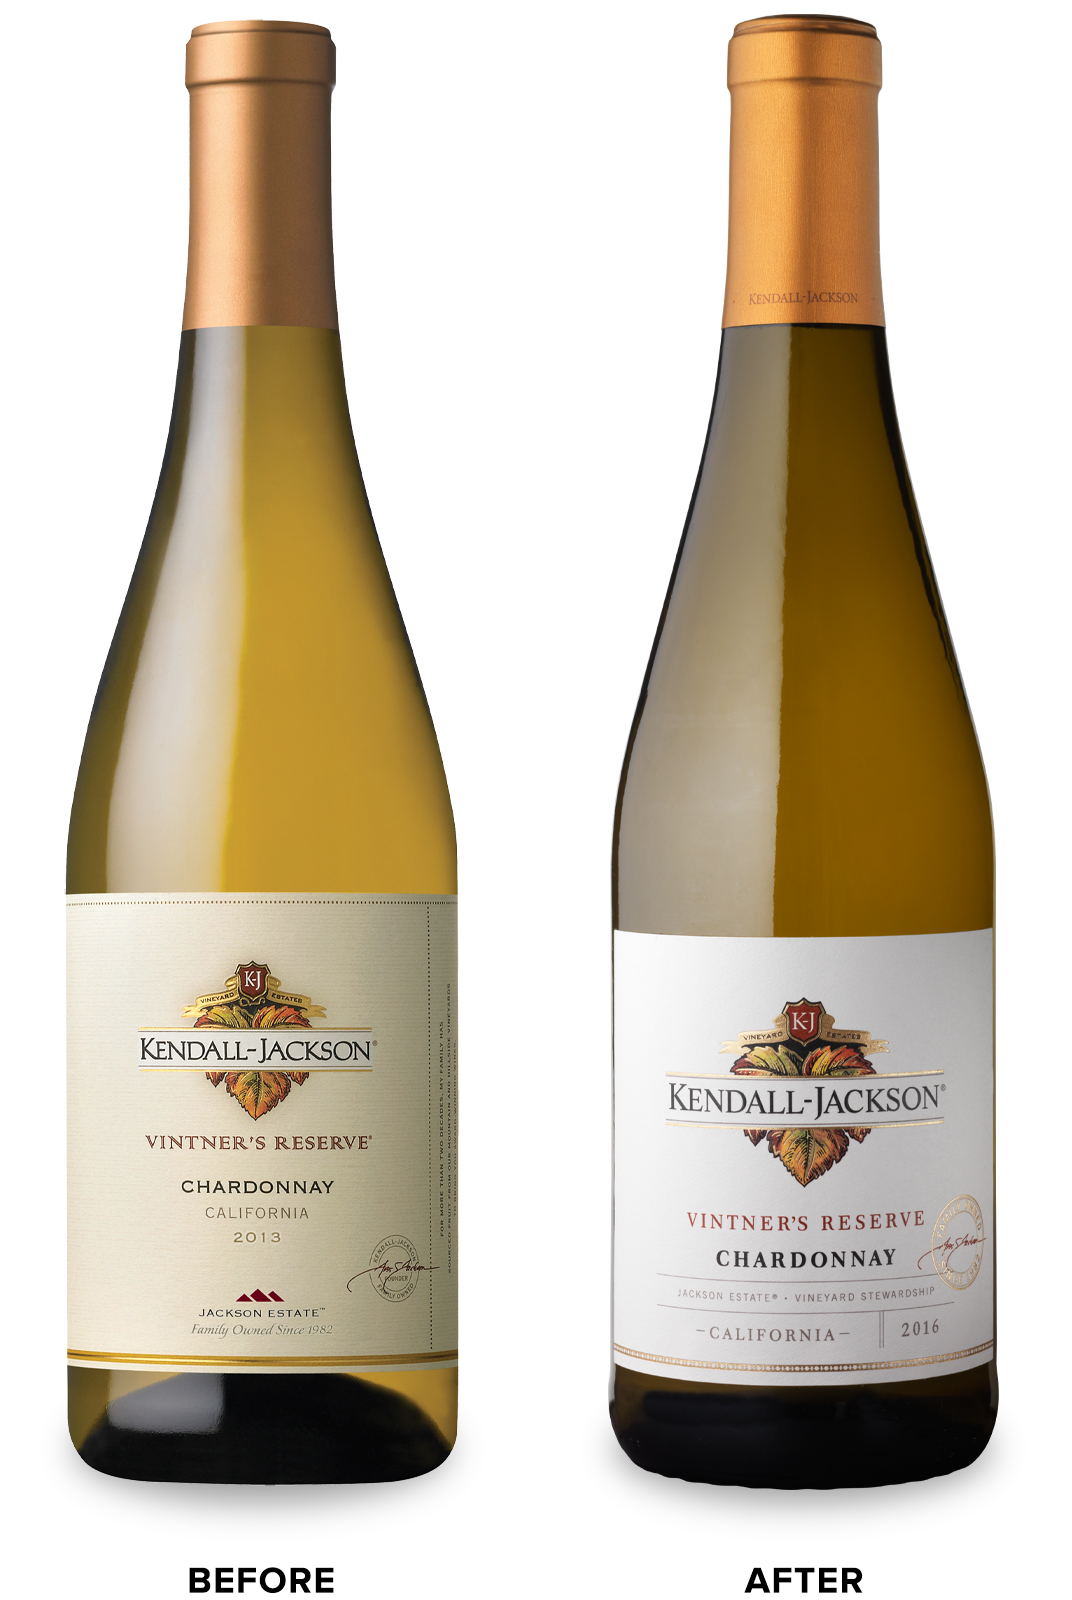 Kendall-Jackson Vintner's Reserve Wine Packaging Before Redesign on Left & After on Right